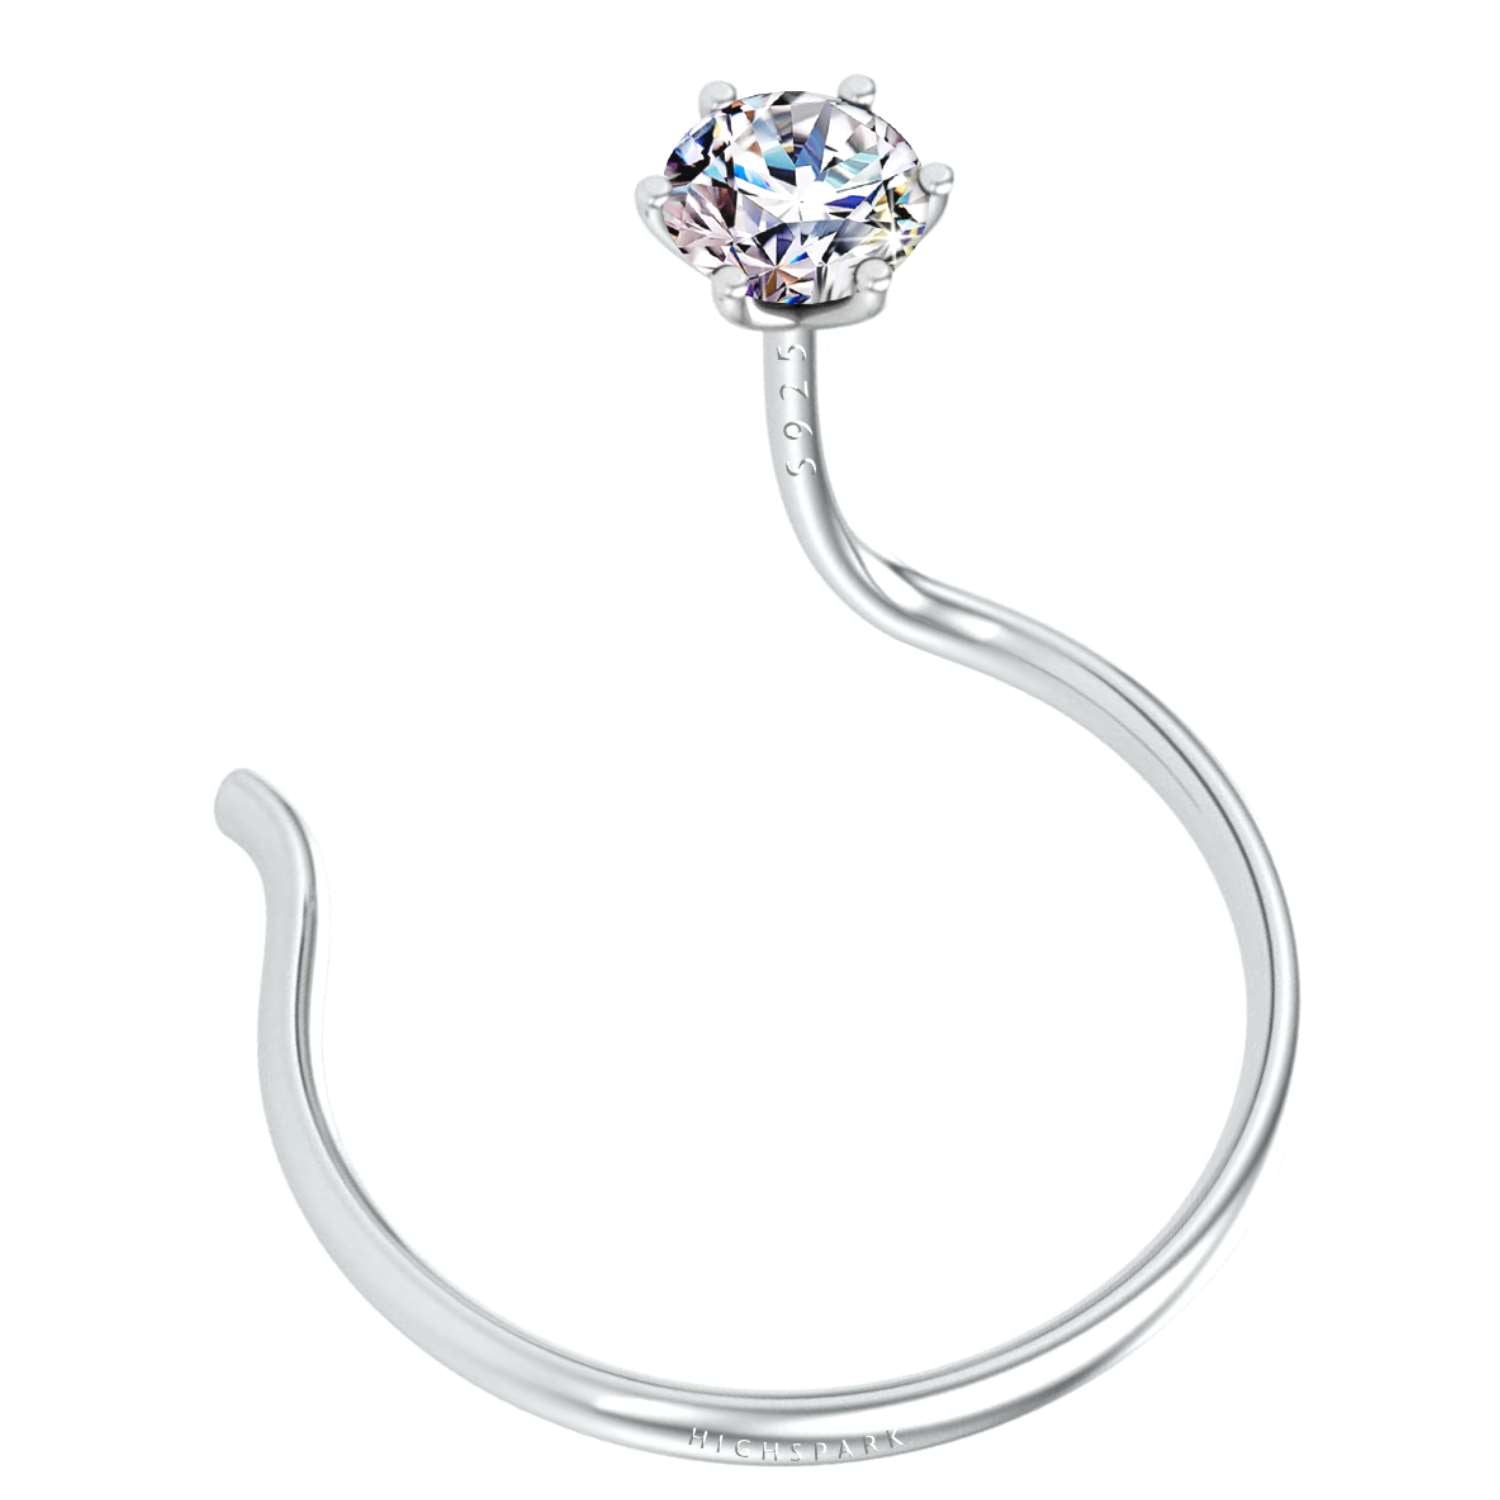 Nose Pin in 92.5 Sterling Silver embellished with Swarovski Zirconia